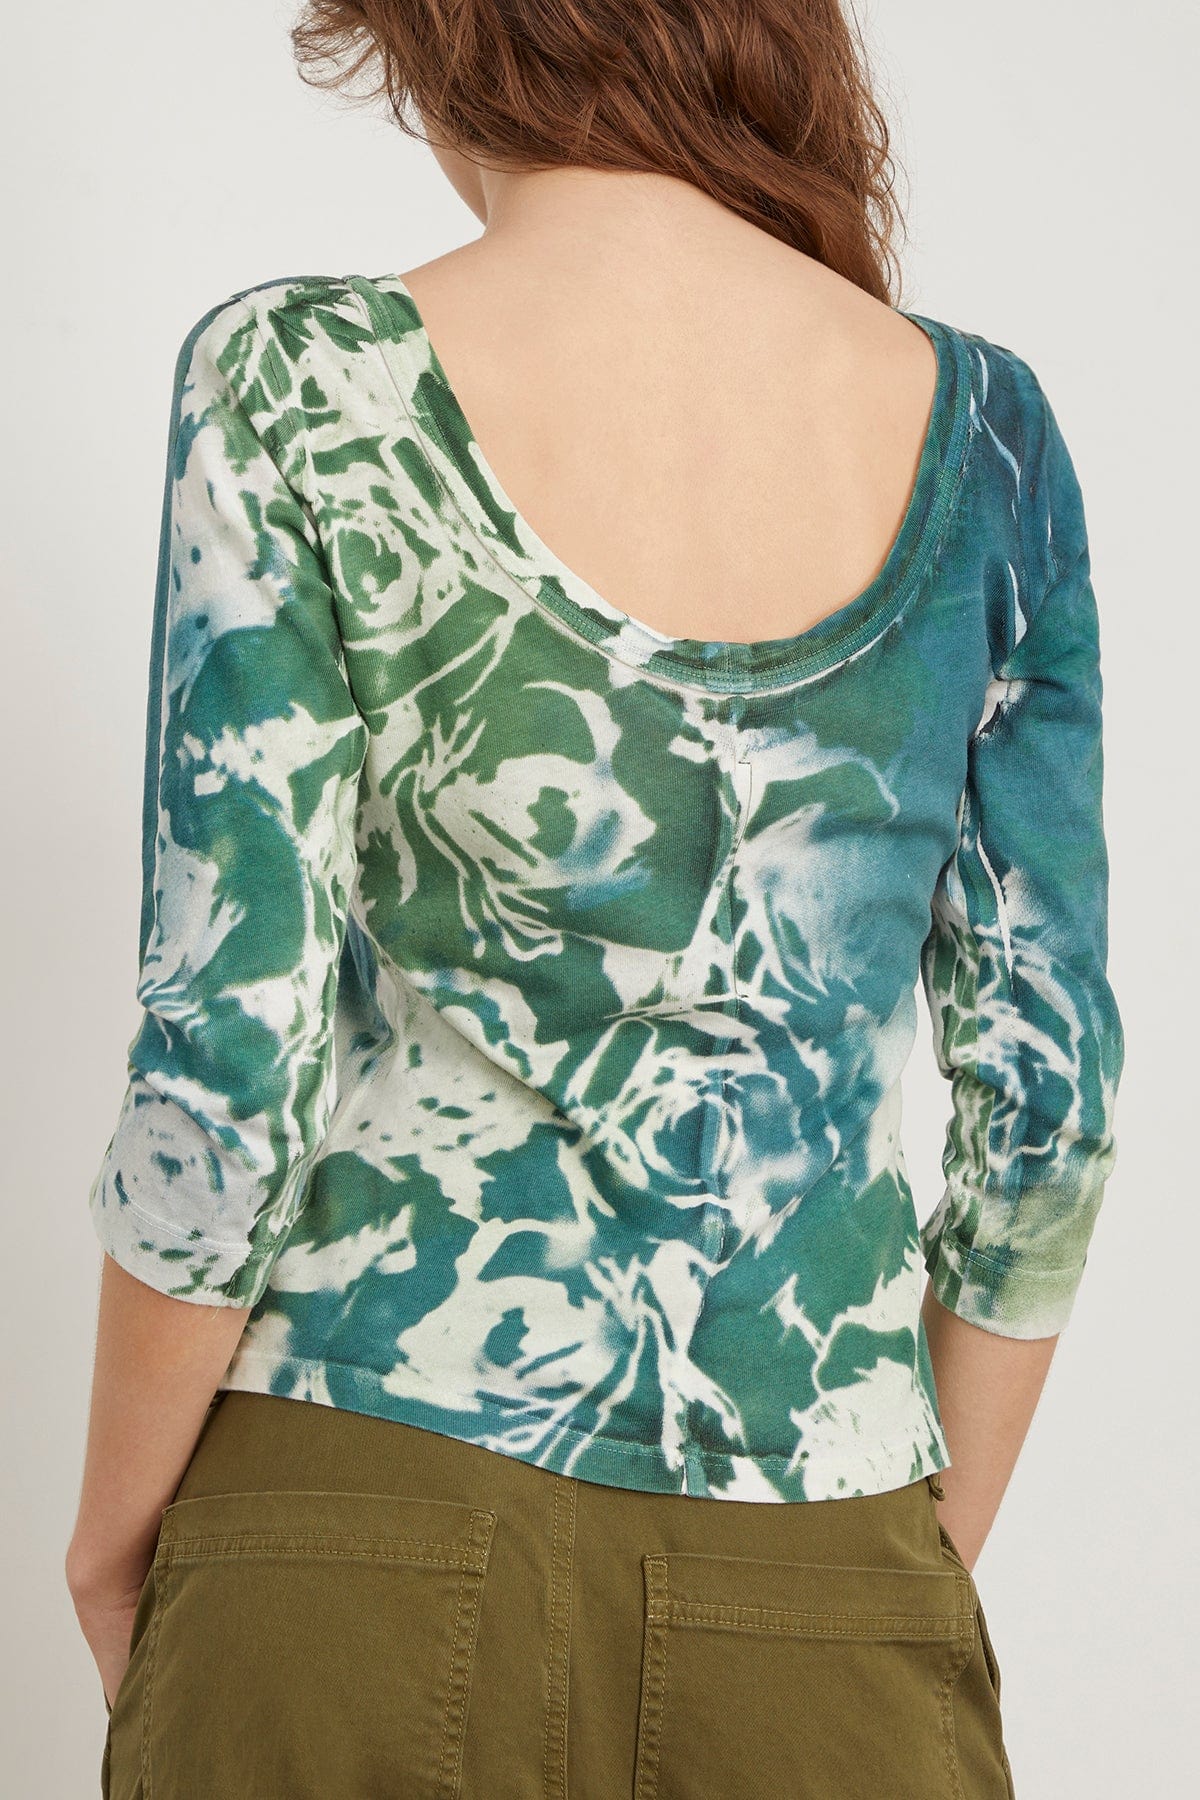 Raquel Allegra Tops Bryony Top in Teal Army Rose Raquel Allegra Bryony Top in Teal Army Rose